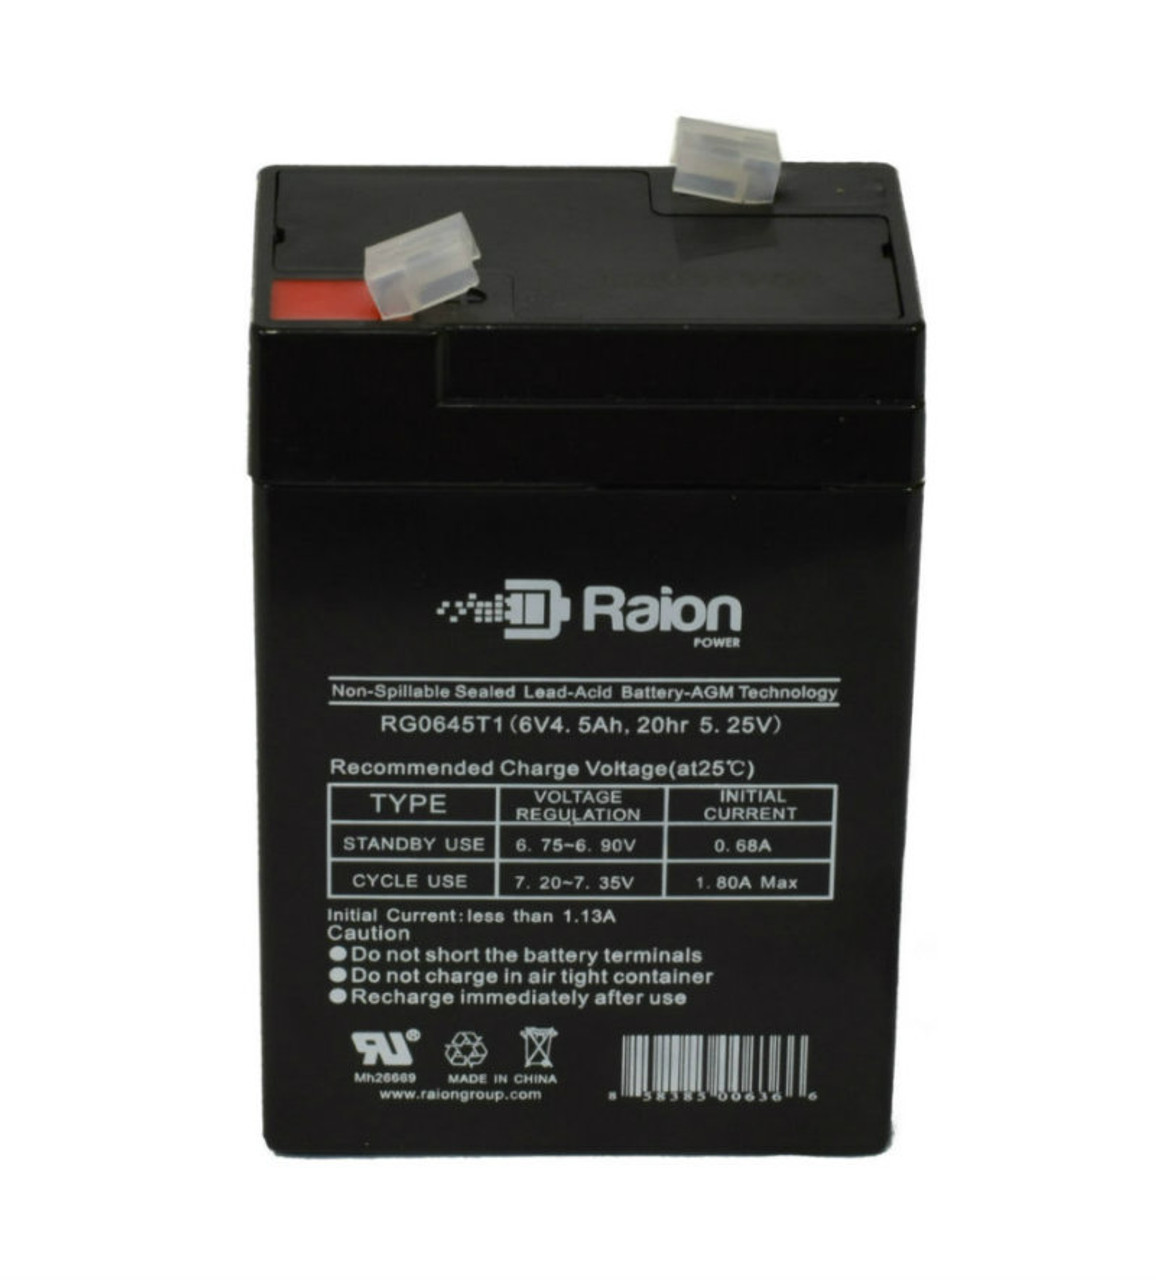 Raion Power RG0645T1 Replacement Battery Cartridge for Peg Perego 6V IAKB0508